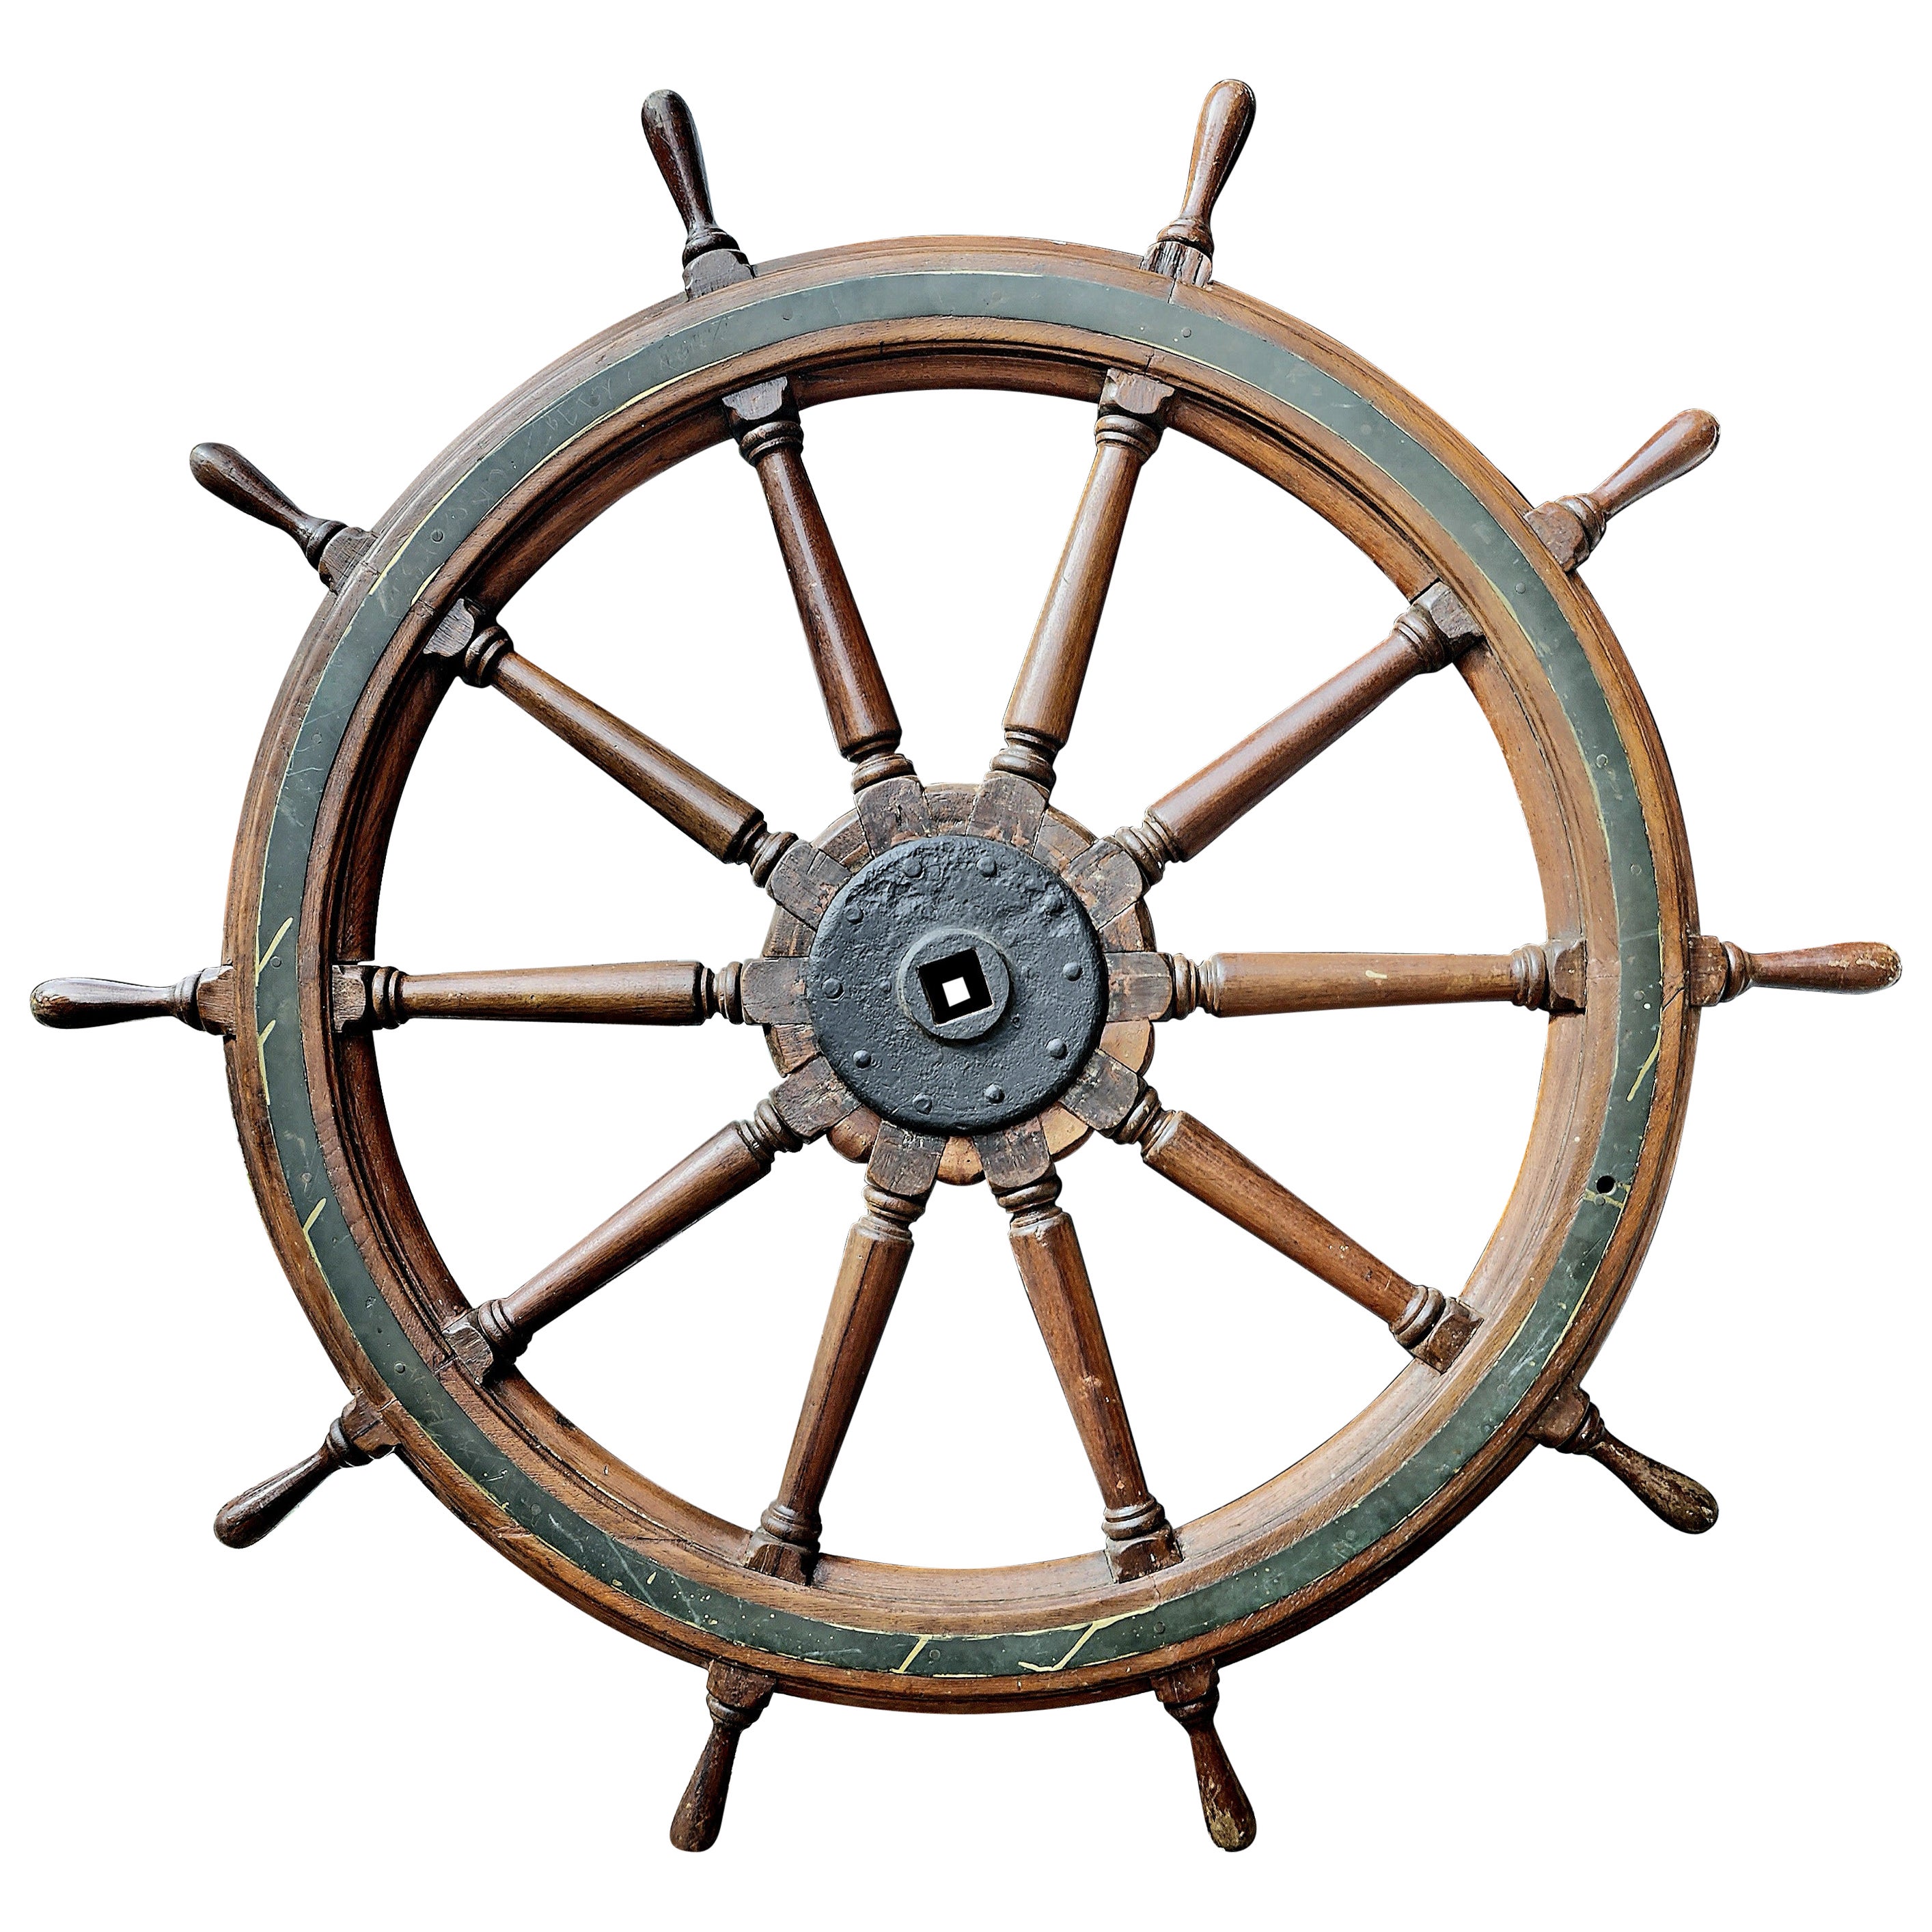 Exceptionally beautiful and large 19th century ships wheel. This item was de-accessioned from a museum collection in Connecticut. museum inventory numbers on mount.
This wheel is an excellent original condition. Retaining an old dry surface and